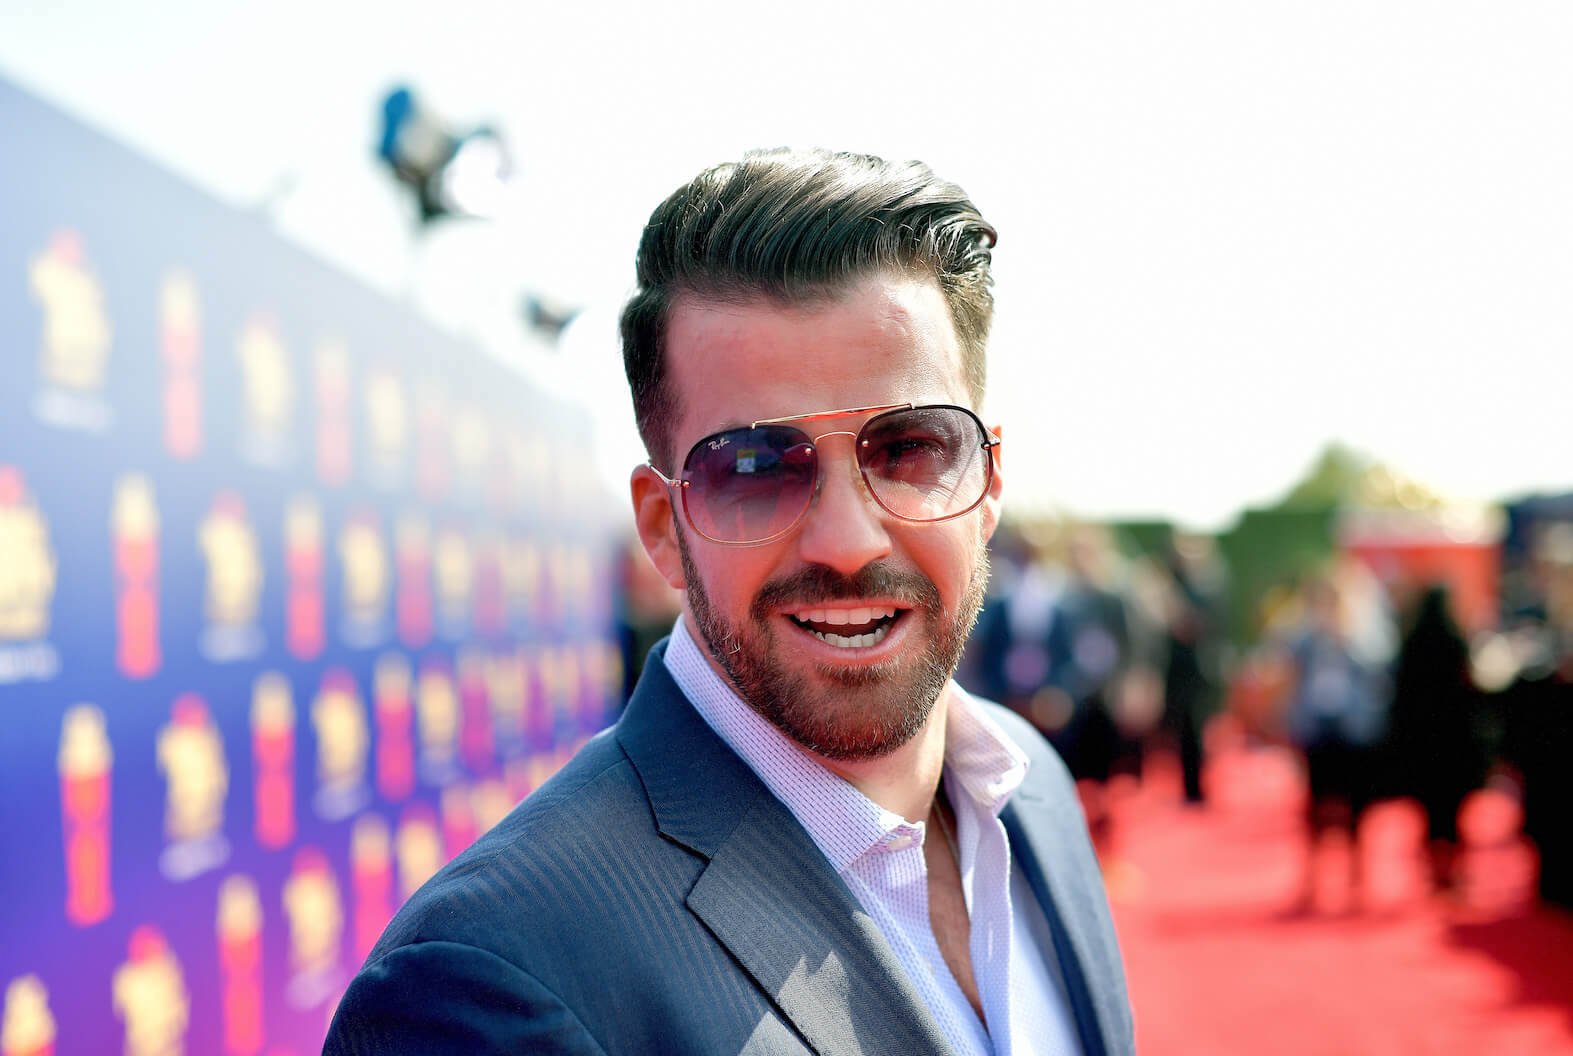 Johnny 'Bananas' Devenanzio from 'The Challenge' on the red carpet